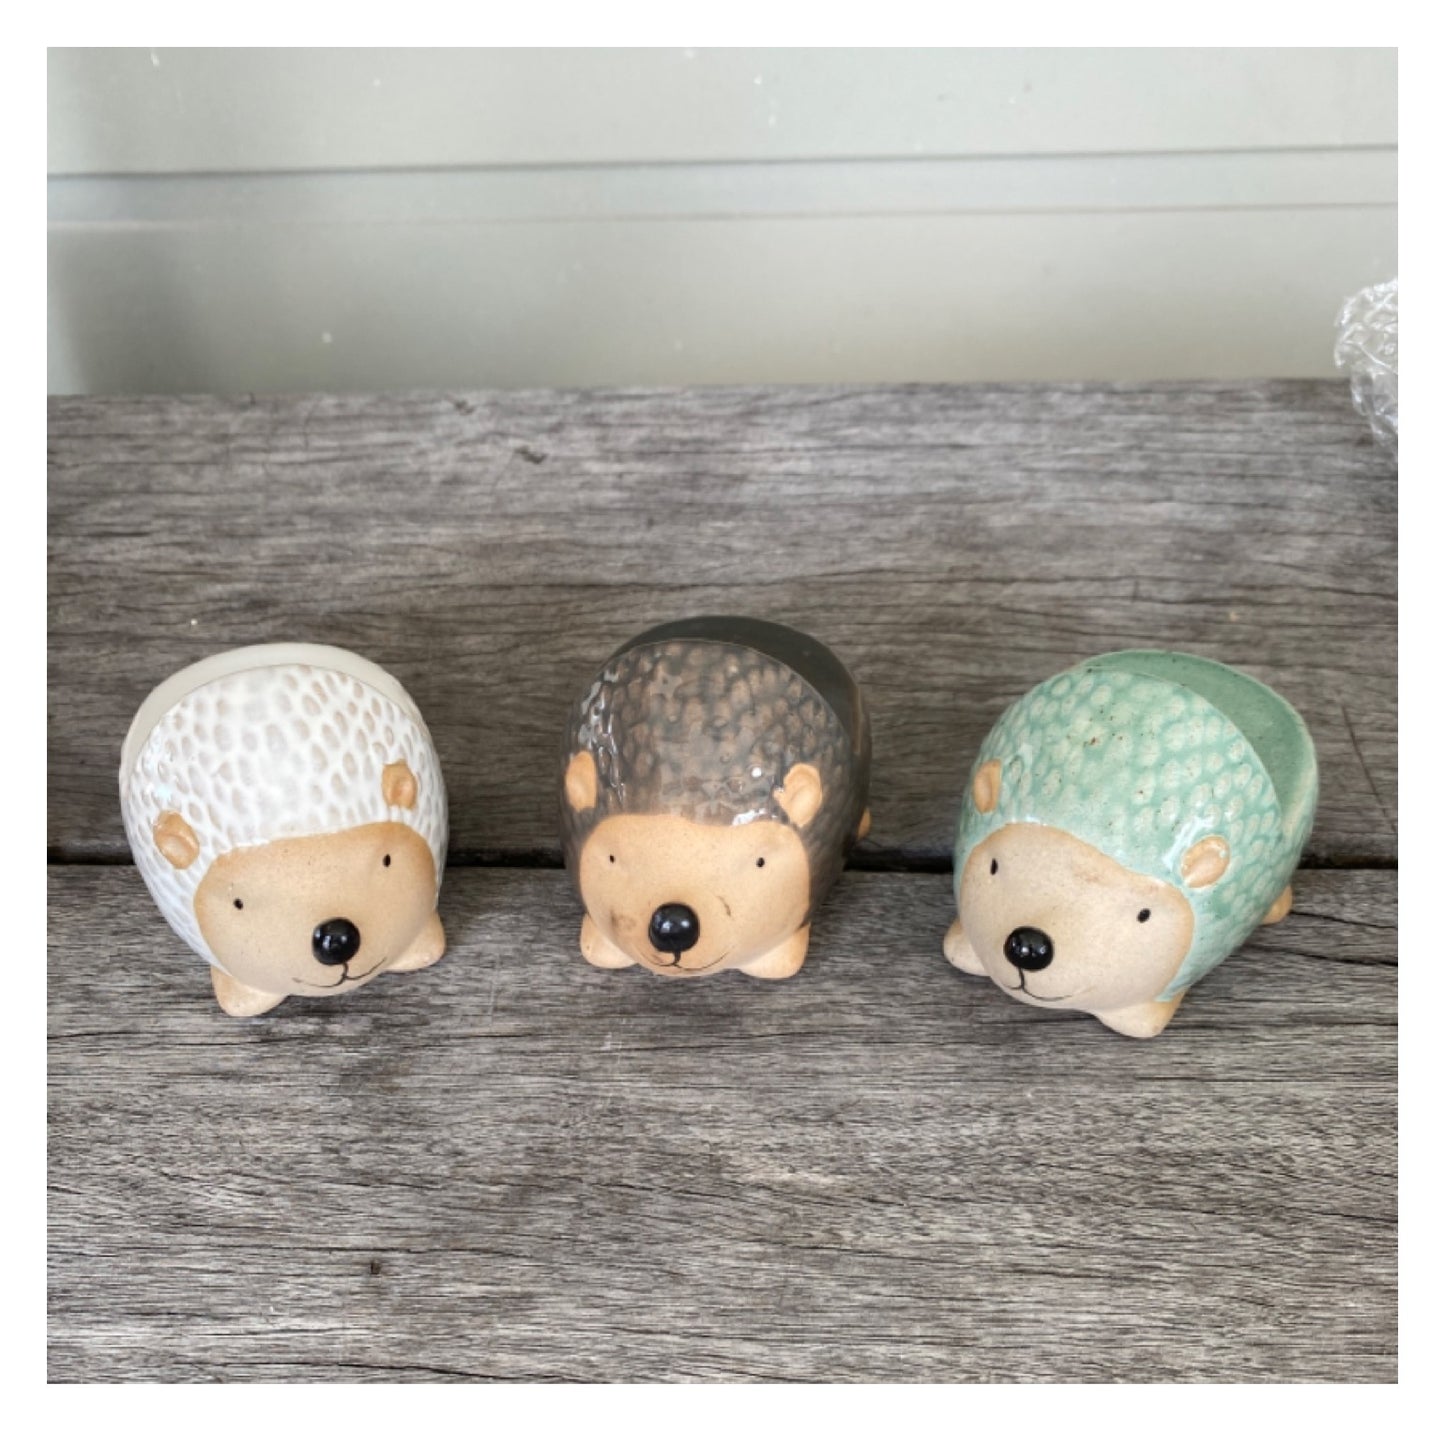 Pot Plant Feet Echidna Set of 3 - The Renmy Store Homewares & Gifts 